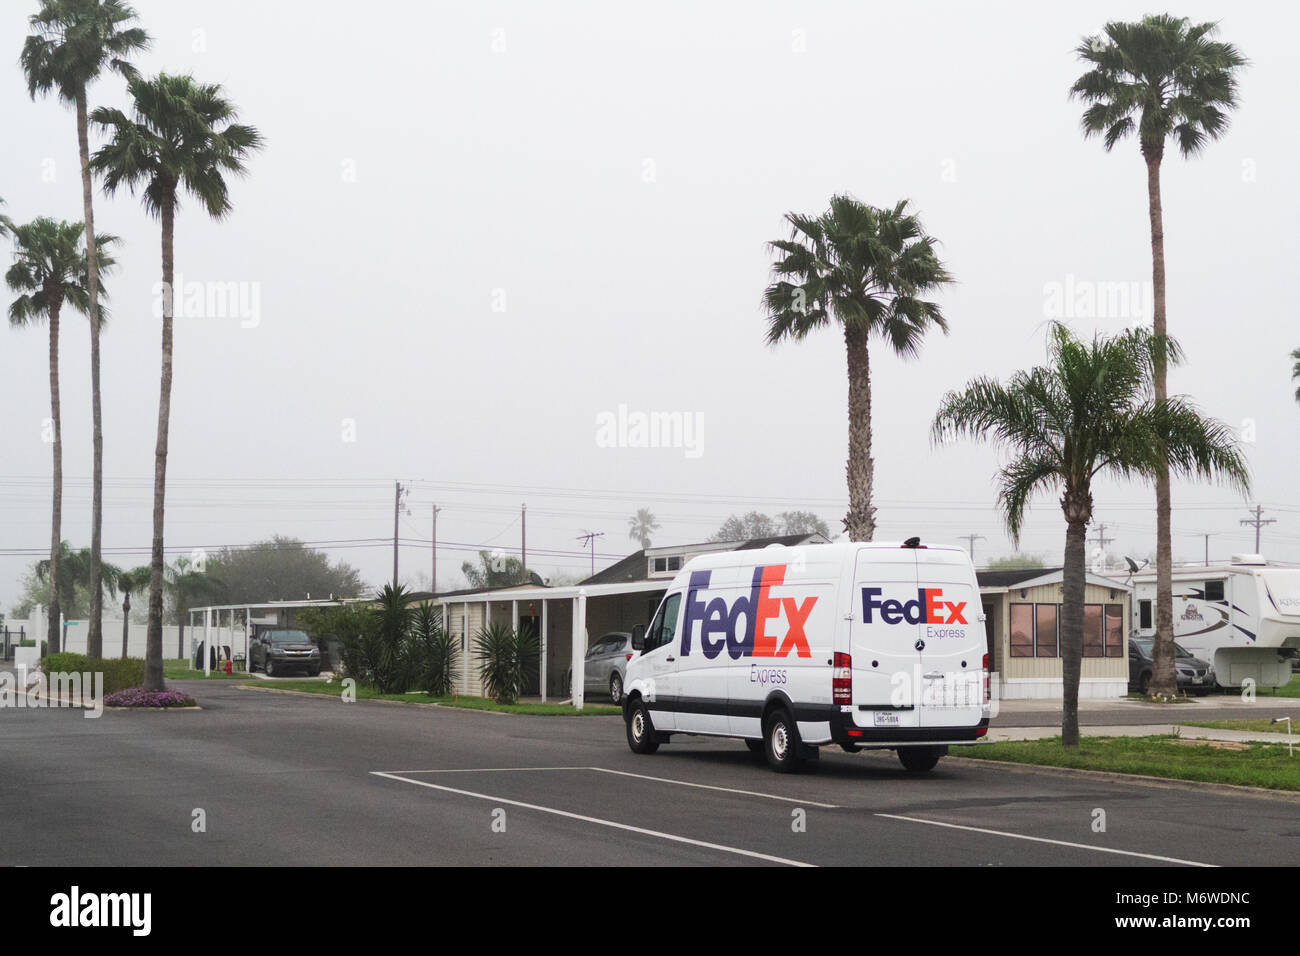 FedEx truck makes deliveries in an RV mobile home park in south Texas on a dreary, overcast day. Stock Photo